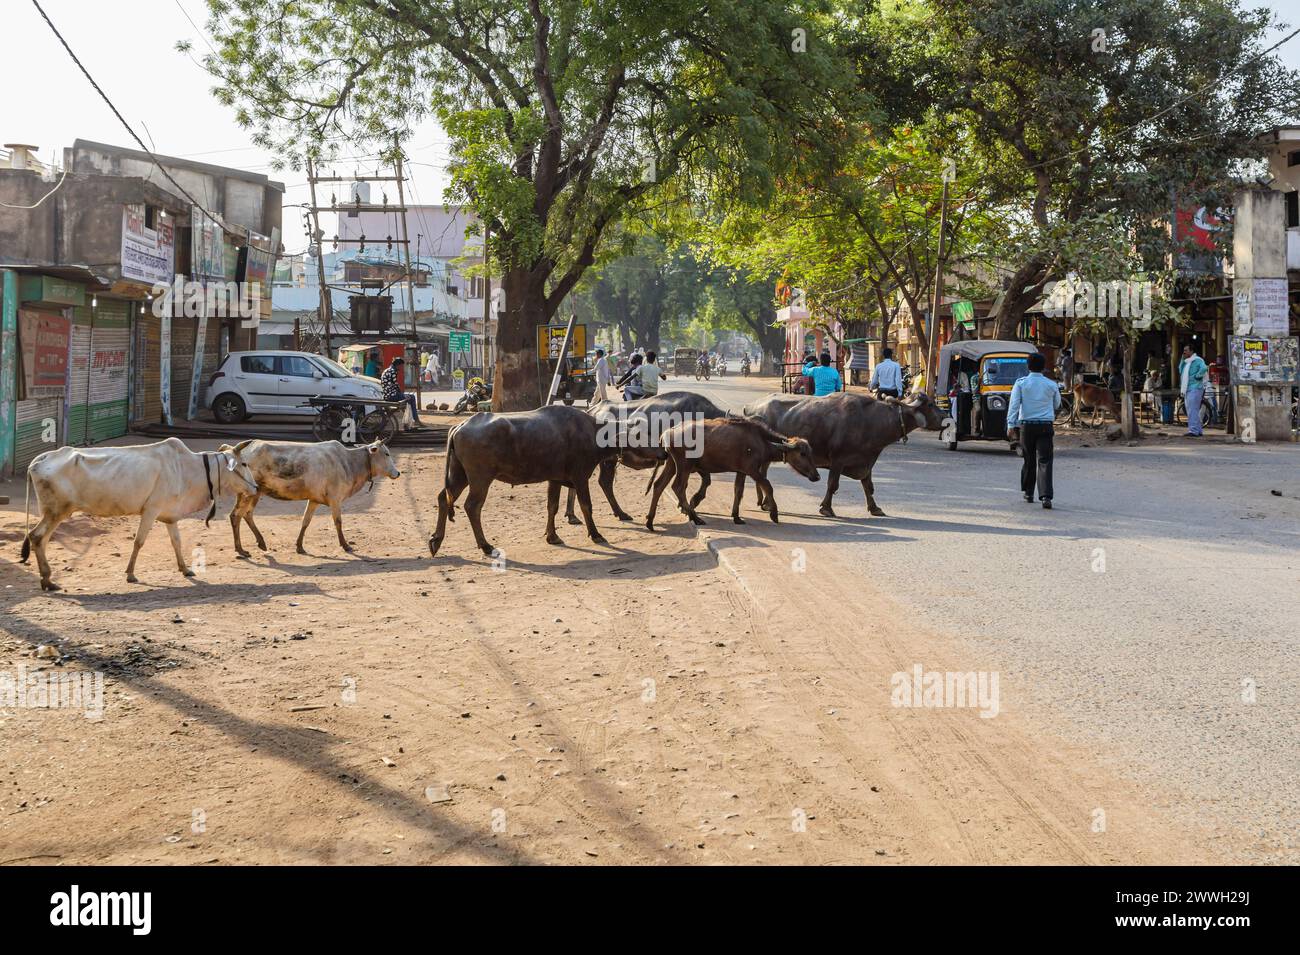 Typical street scene: cows walking across a dusty road in a town near Bandhavgarh in the Umaria district of Madhya Pradesh, India Stock Photo